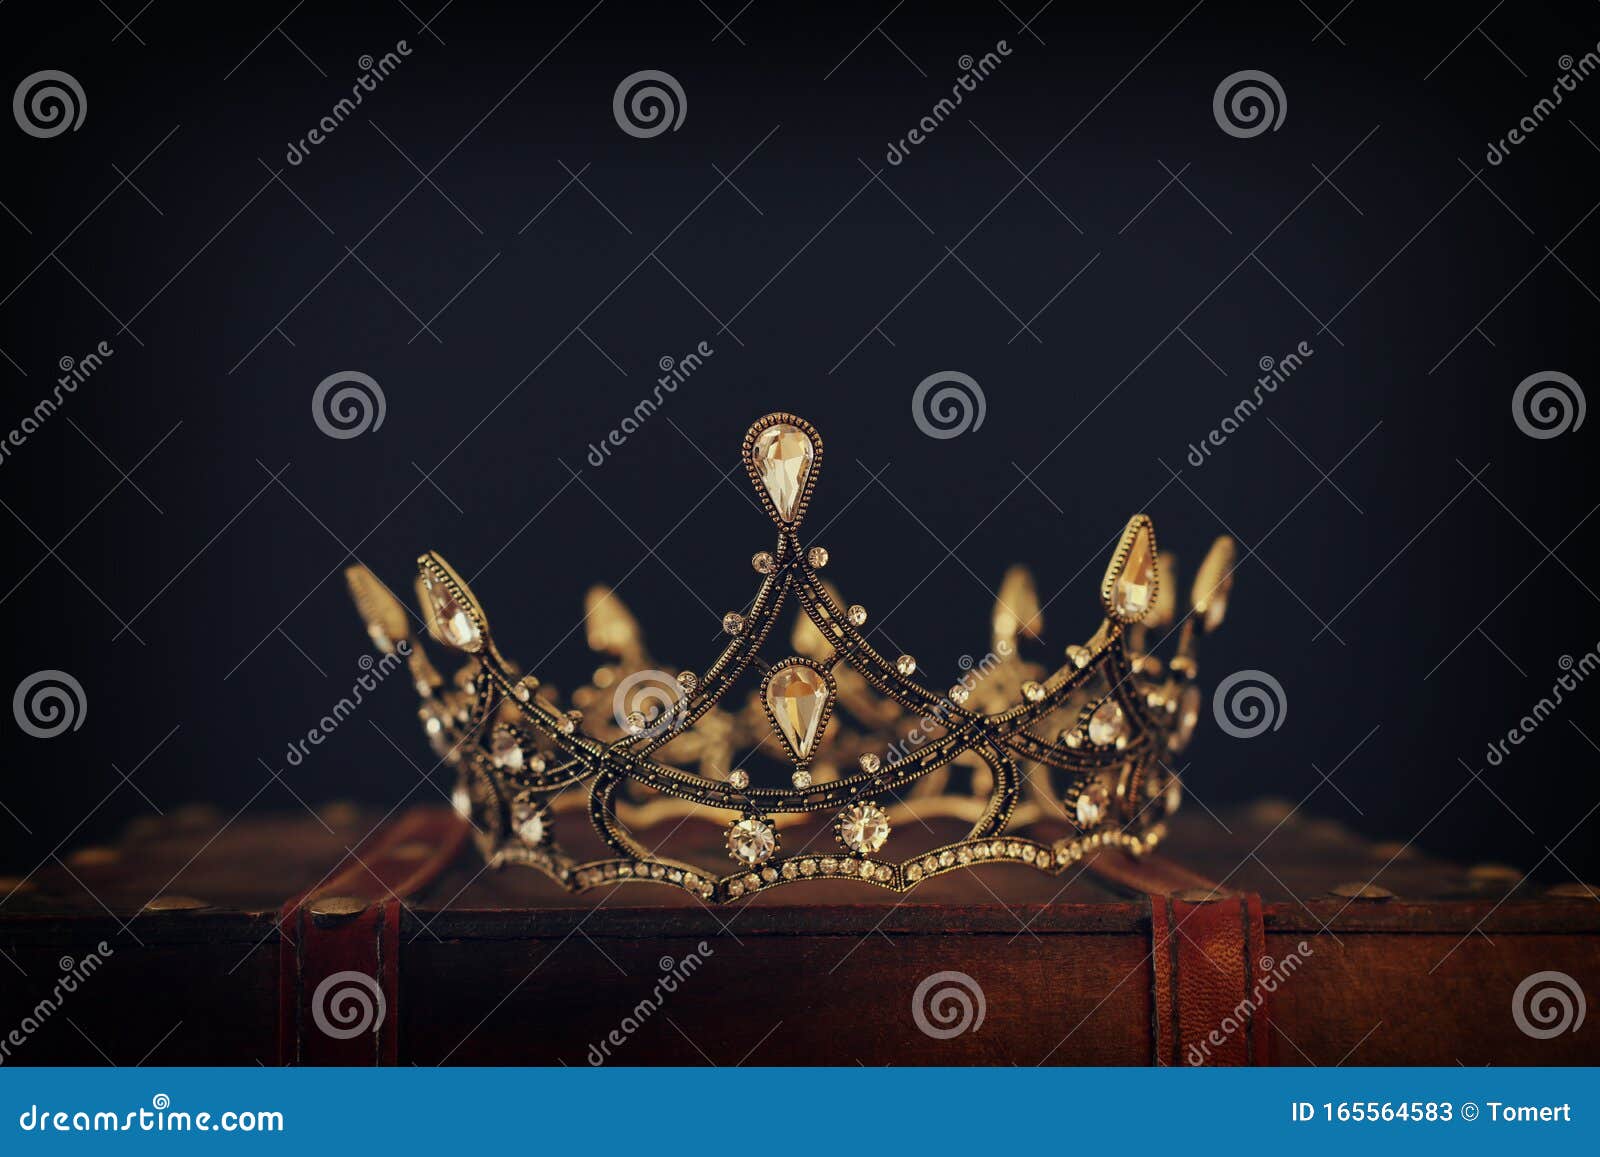 Low Key Image of Beautiful Queen/king Crown Over Wooden Table. Vintage